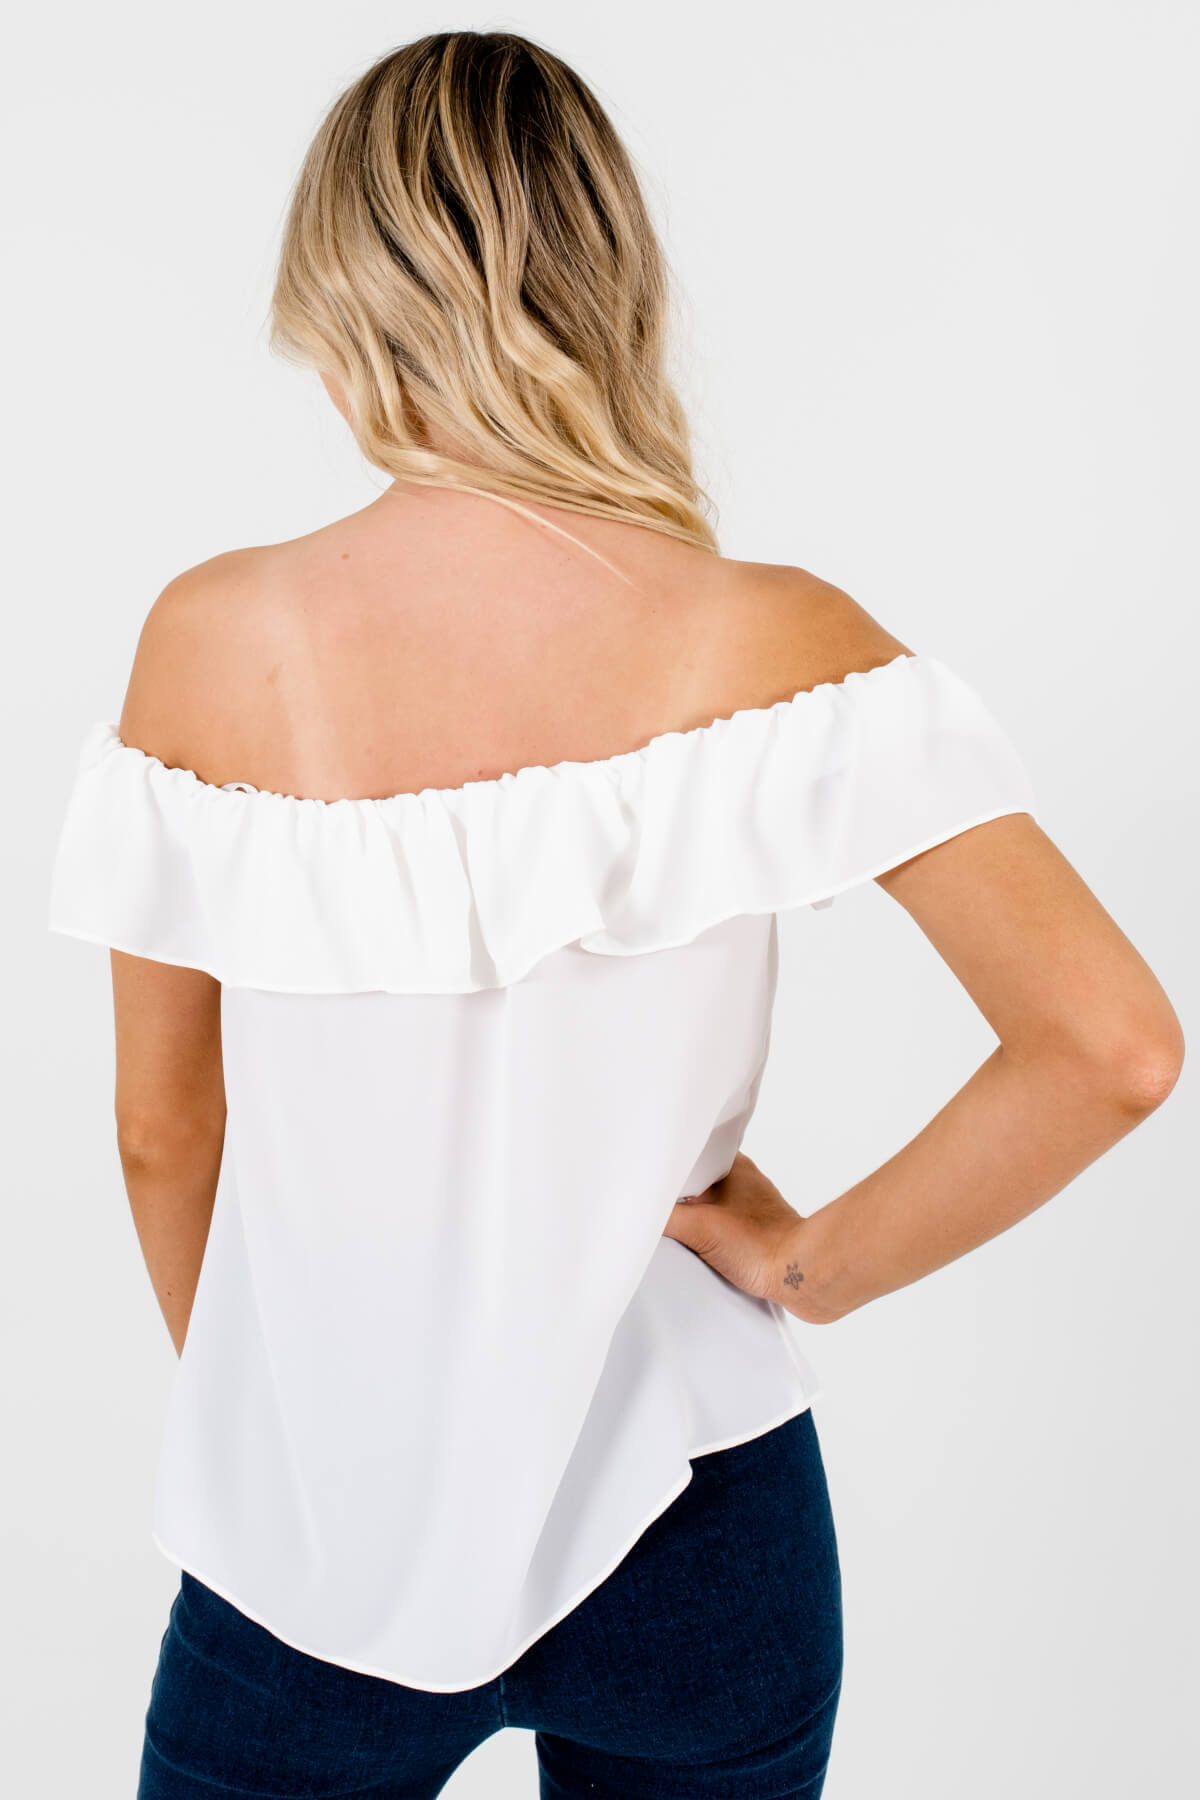 Women's White Ruffle Accents Boutique Tops